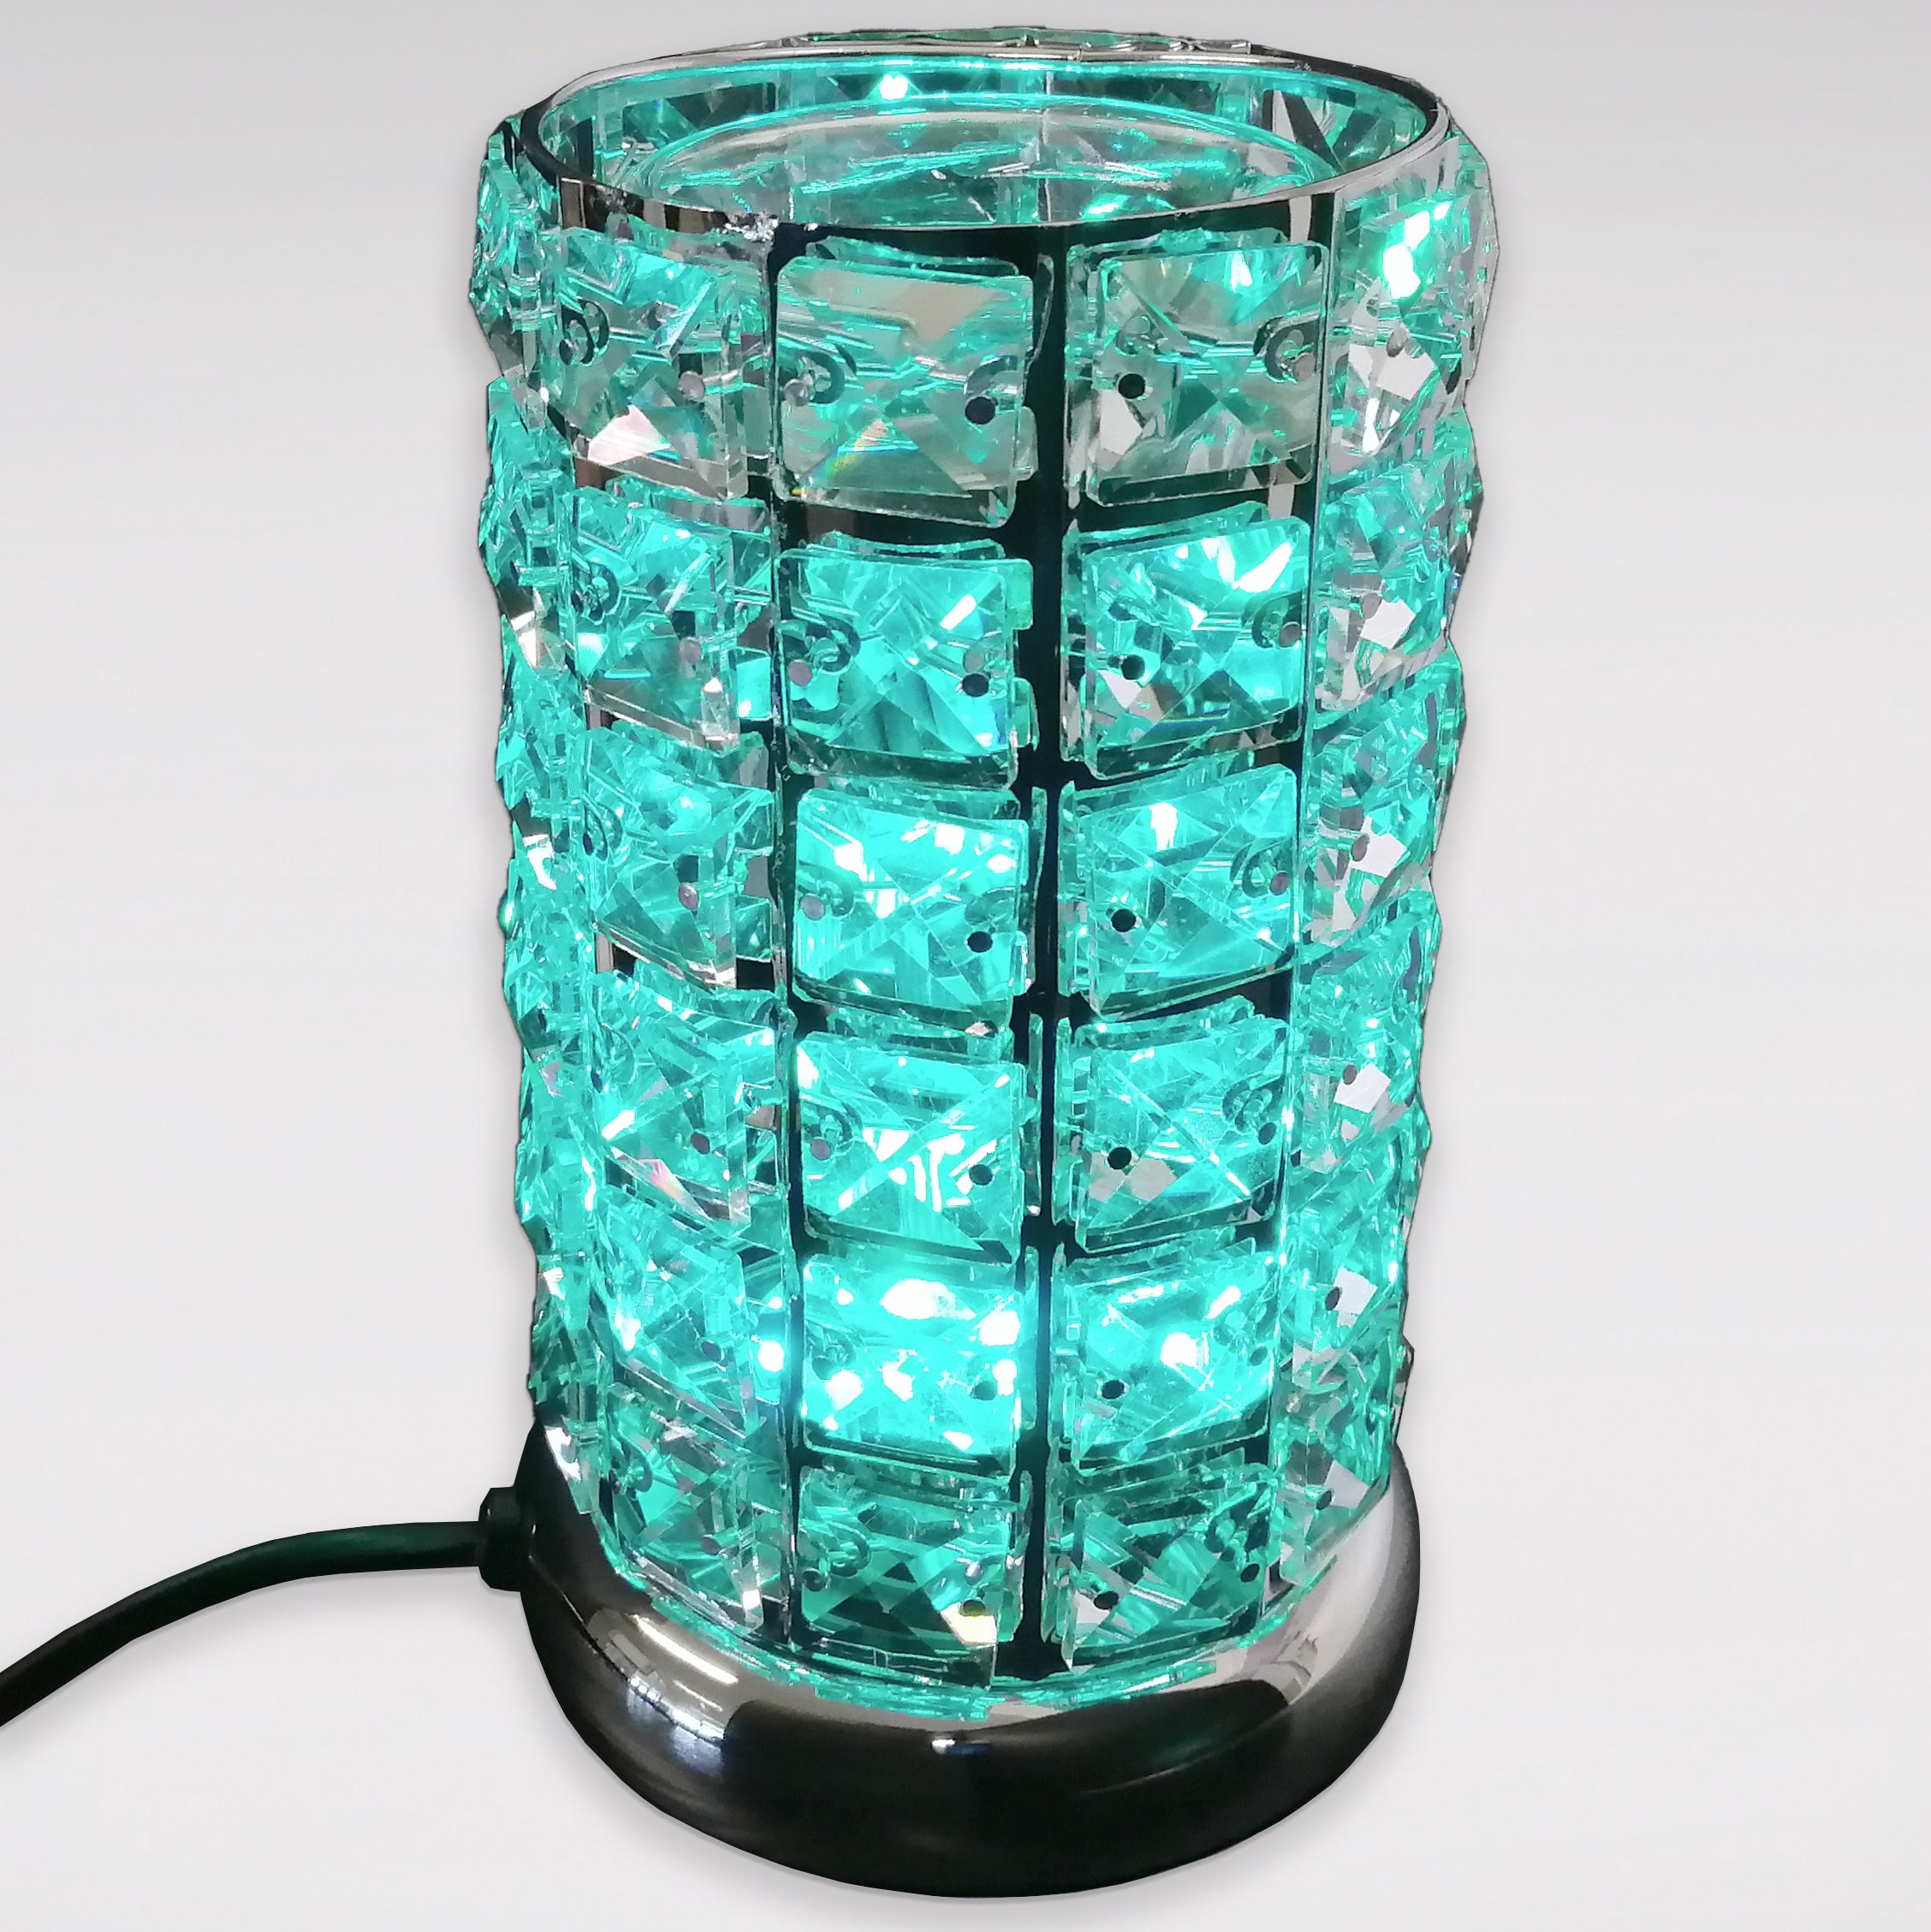 Scentchips Warmer 3D LED 'Crystal-Look' Colour Changing Display